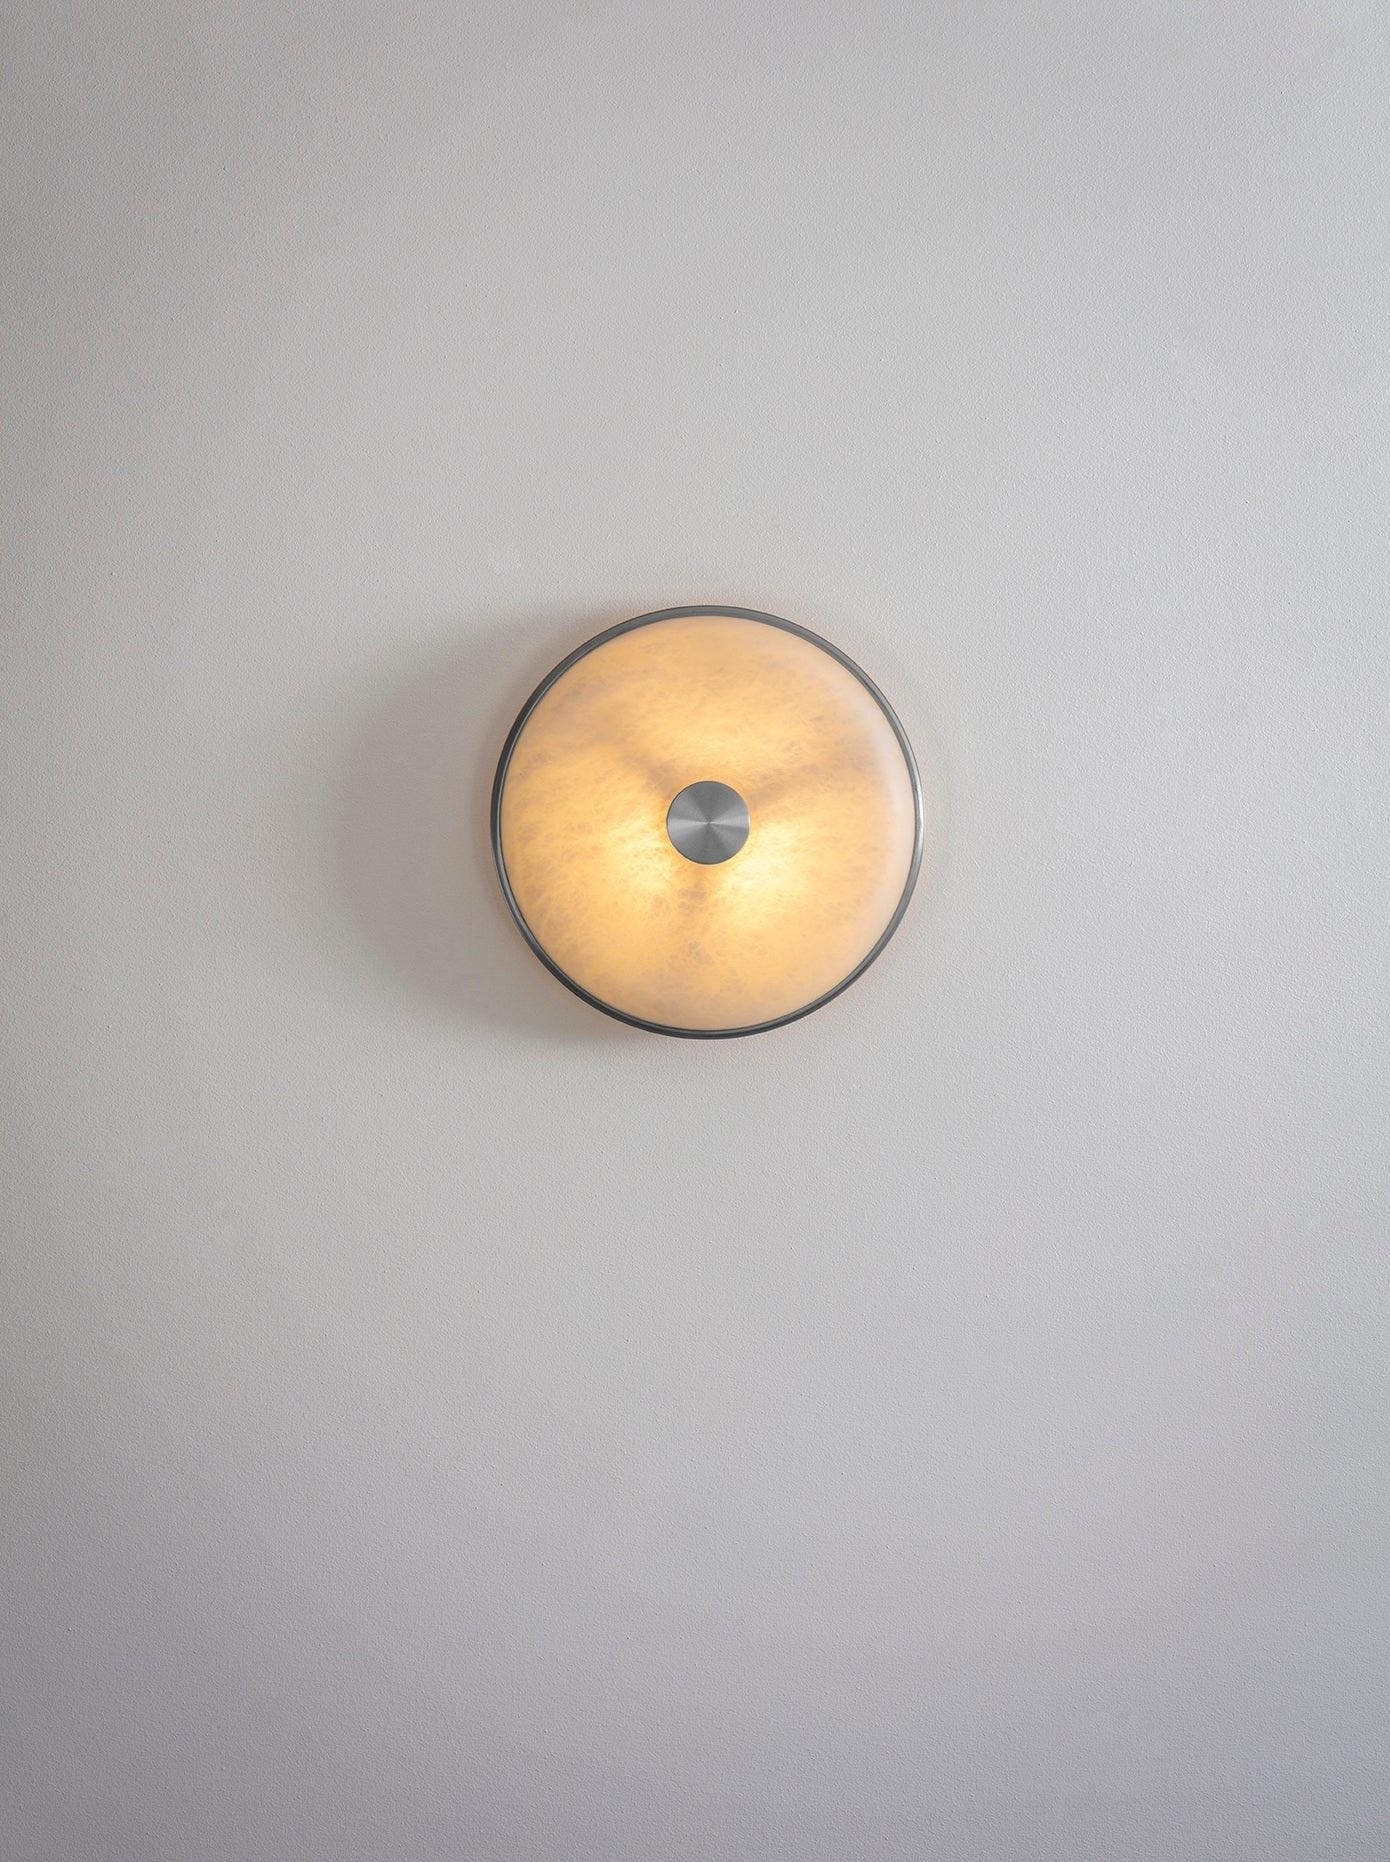 Beran Satin Nickel Small Wall Light by Bert Frank
Dimensions: D 6,5 x W 26 x H 26 cm.
Materials: Nickel and alabaster.

Available in two different sizes. Available in different finishes and materials. Please contact us. 

Simple and elegant in form,